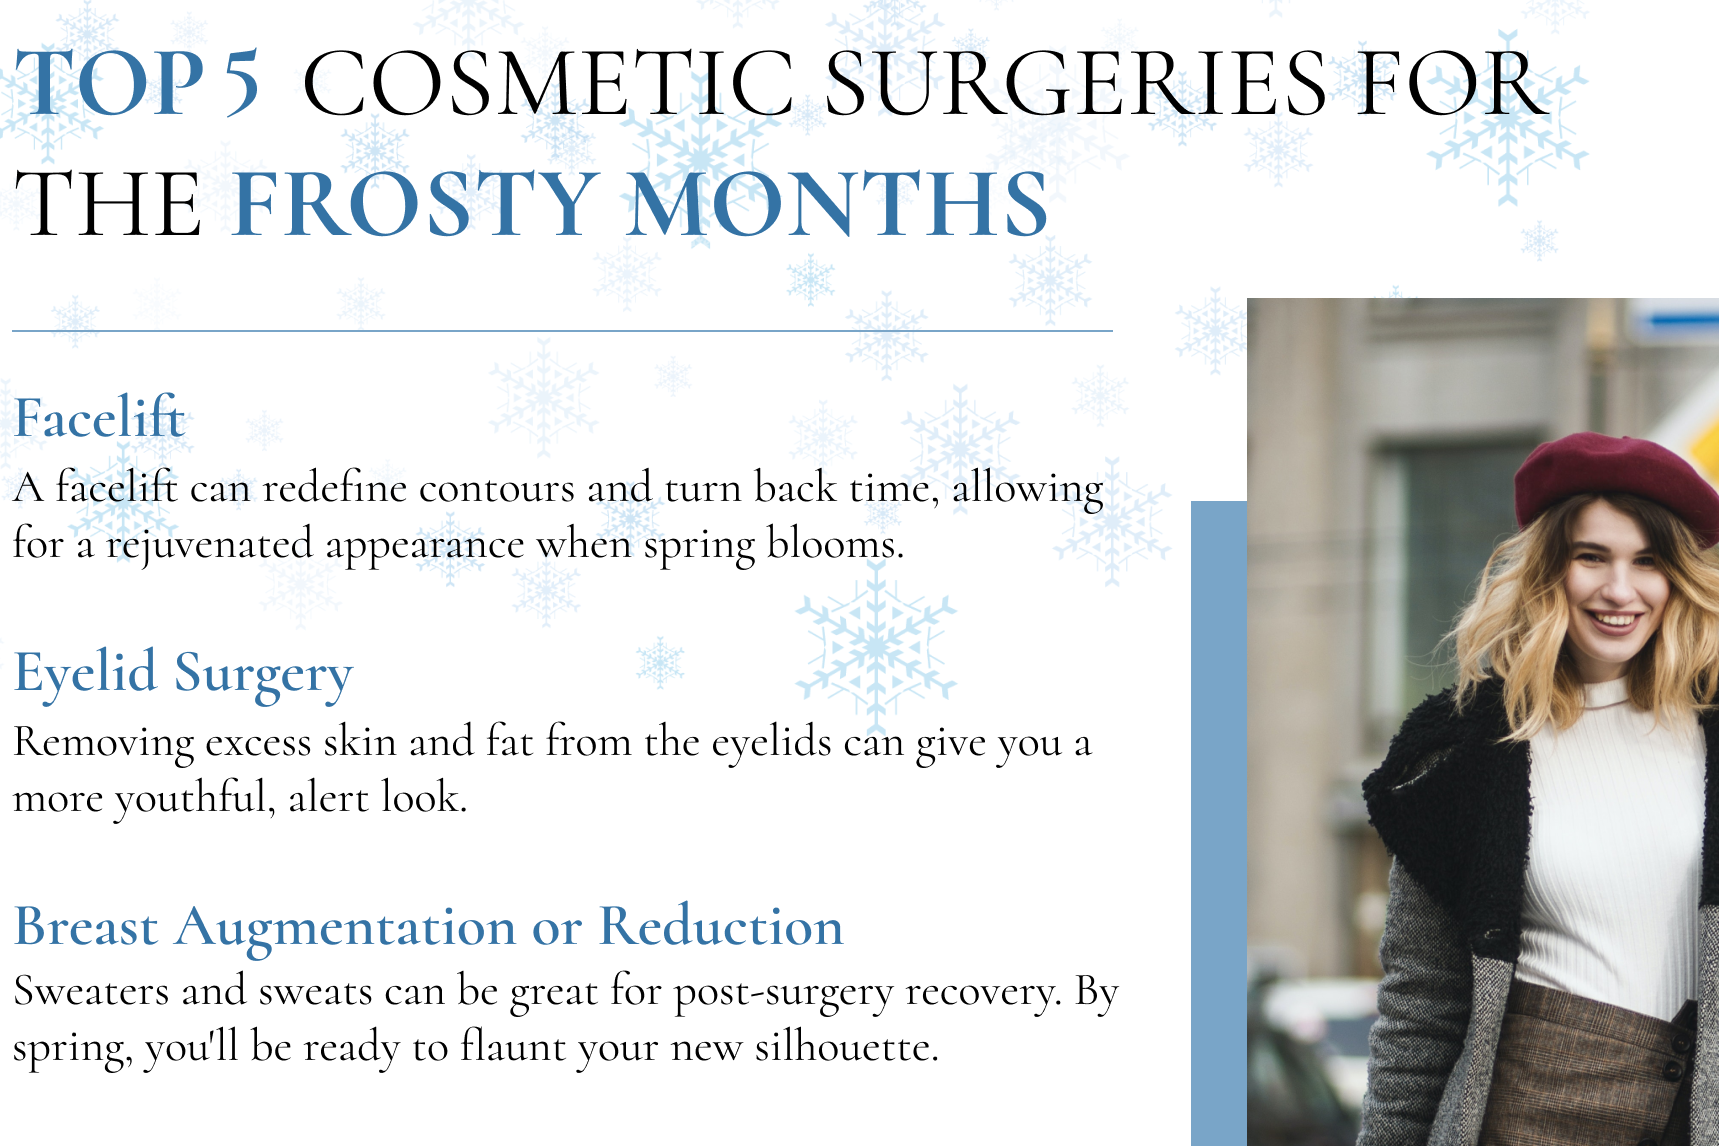 Top 5 Cosmetic Surgeries for the Frosty Months